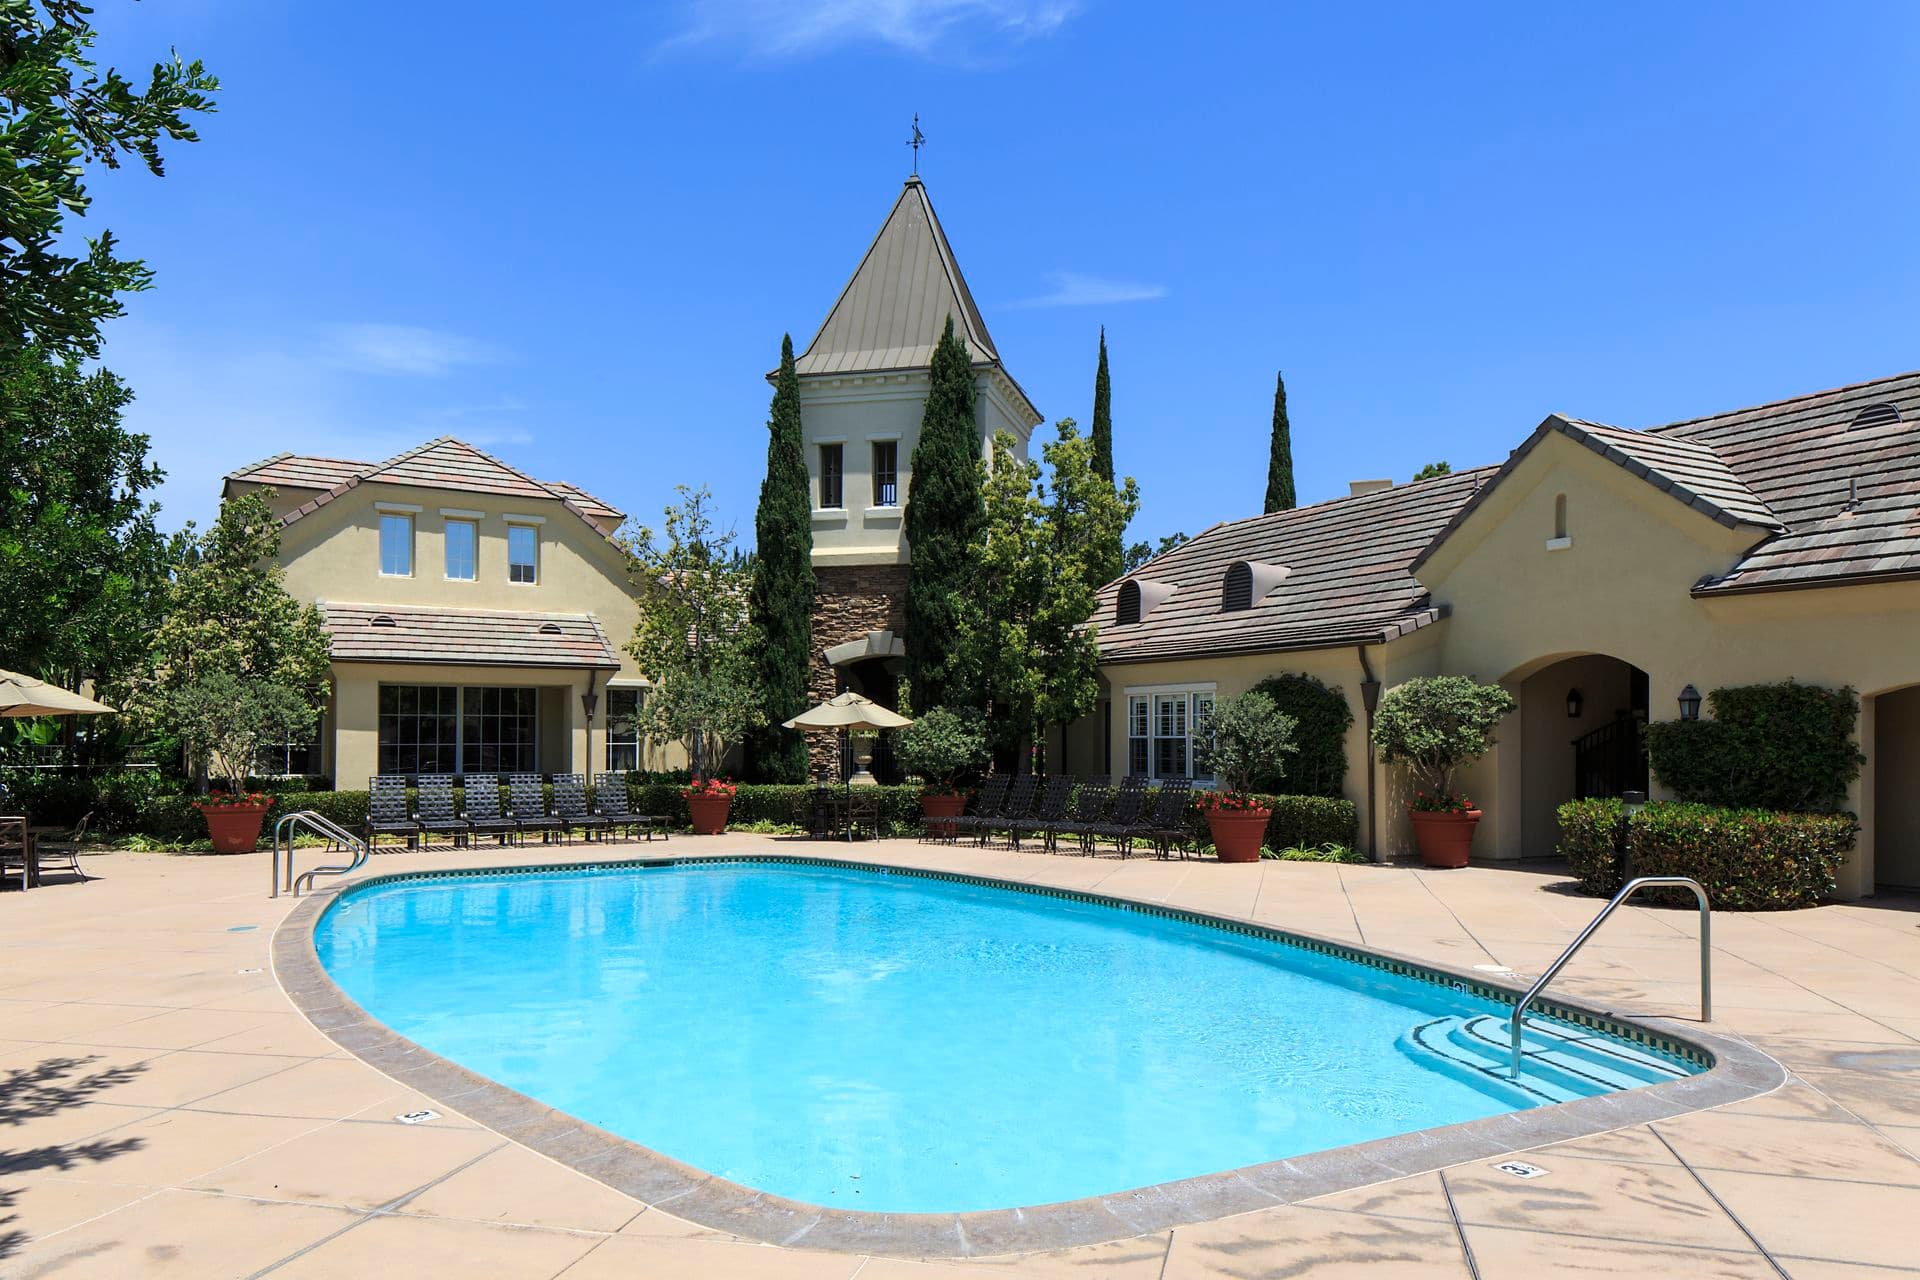 Pool view at Brittany Apartment Homes in Irvine, CA.